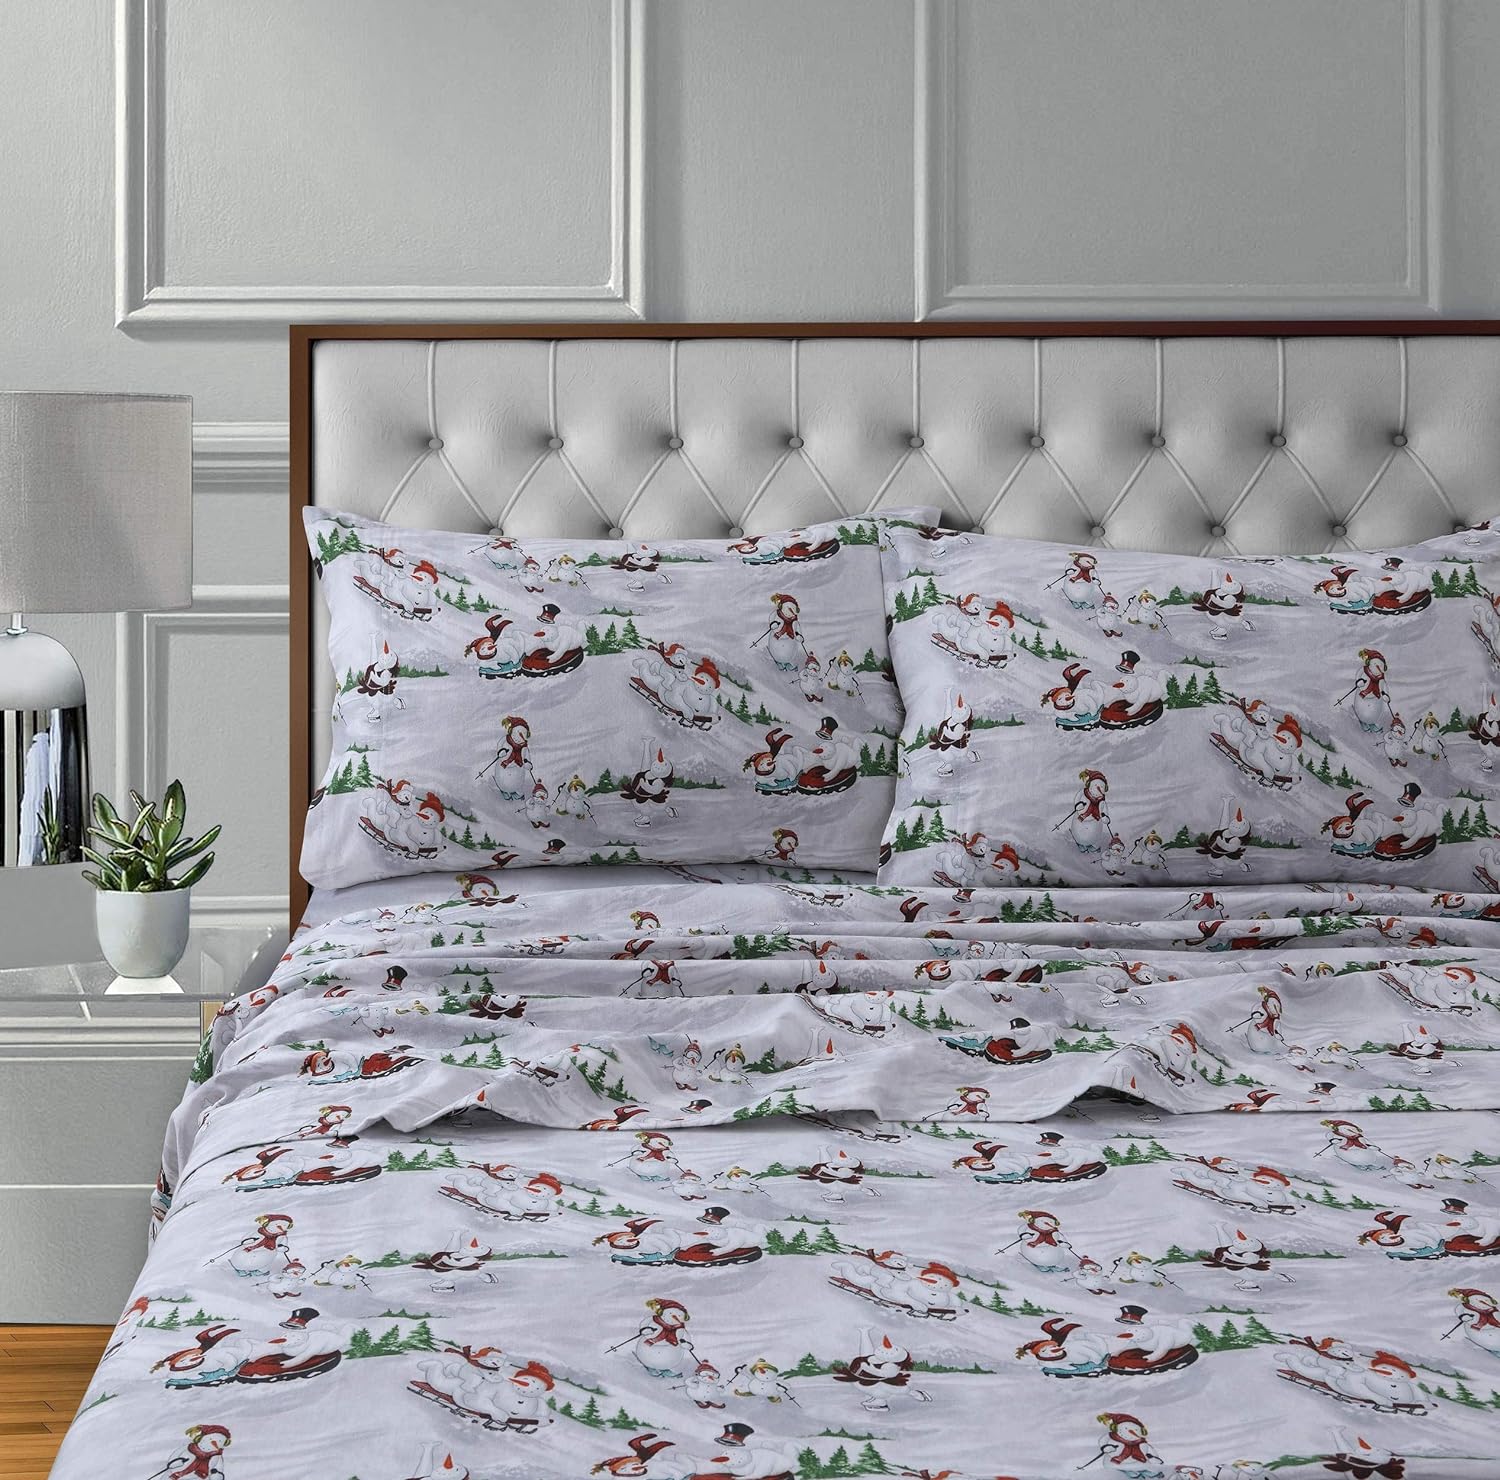 Tribeca Living Paisley printed bed sheets are designed with delicate Paisley patterns to add a touch of elegance to your bedroom. The Paisley pattern is known for its unique wavy and paisley patterns, with a strong Oriental flavor.